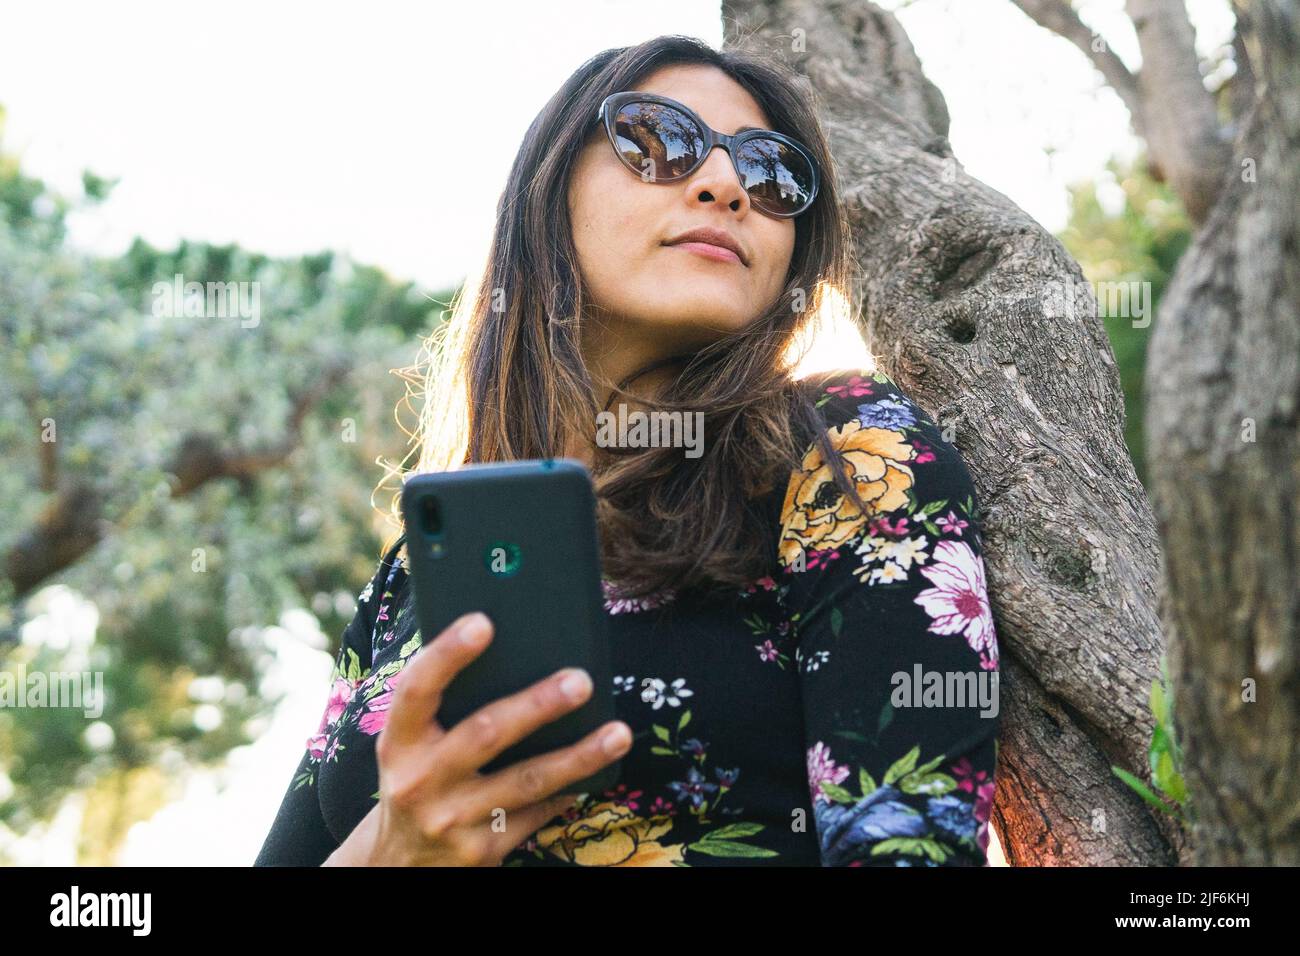 From below ethnic female in sunglasses browsing on smartphone while leaning on tree trunk in sunlit park on summer day Stock Photo